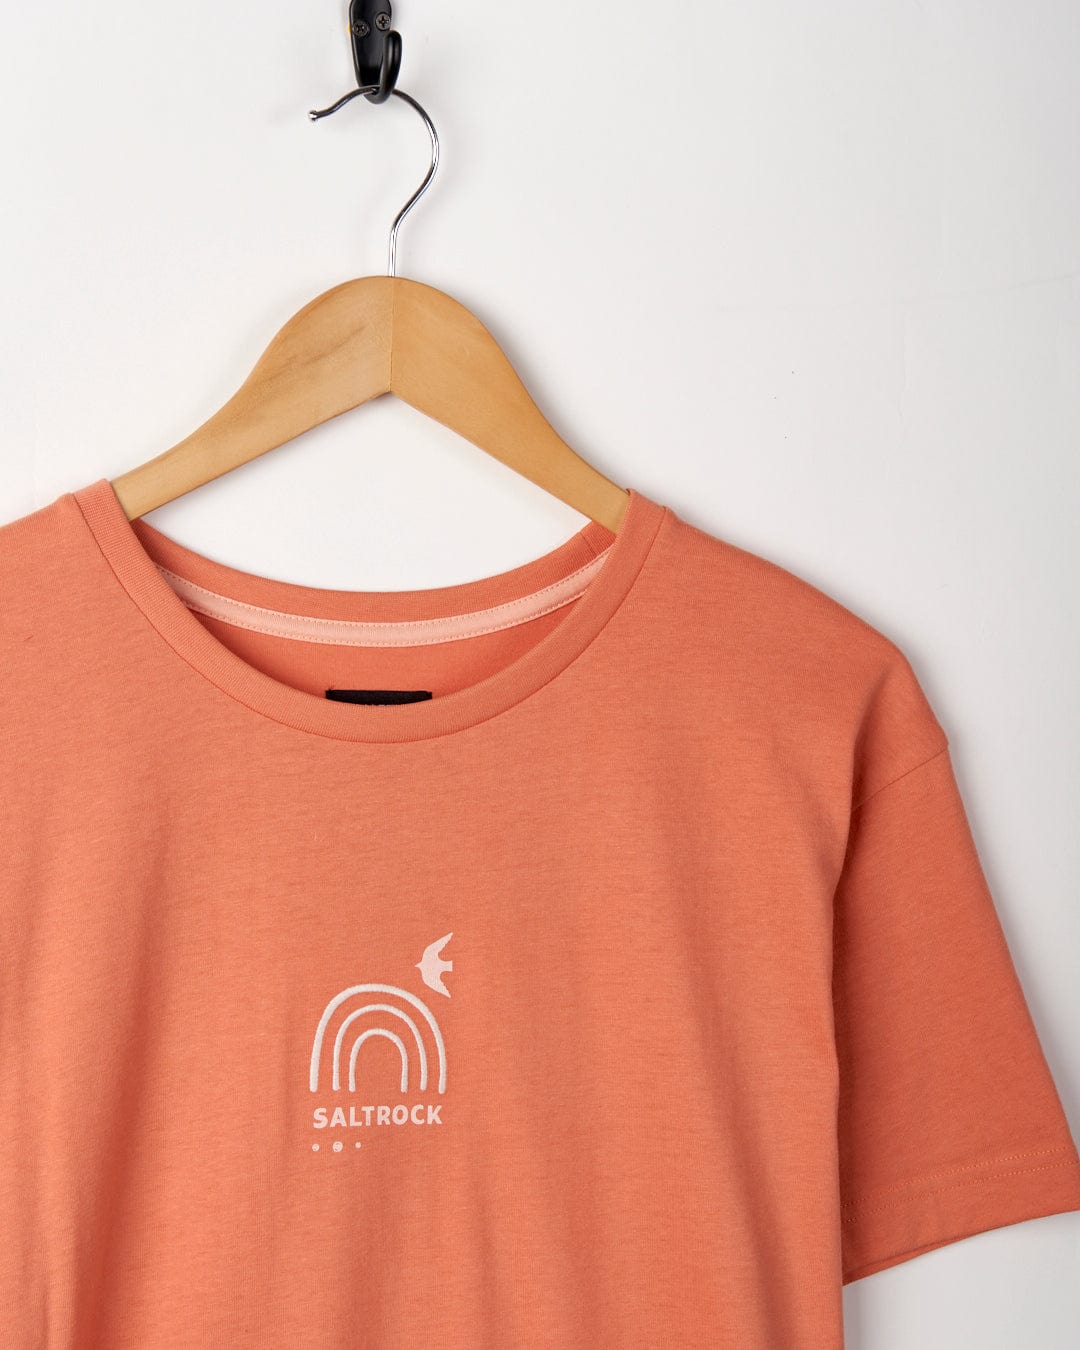 Journey - Recycled Womens Short Sleeve T-Shirt in Peach with a "Saltrock" logo embroidered on recycled polyester, hanging on a wooden hanger against a white background.